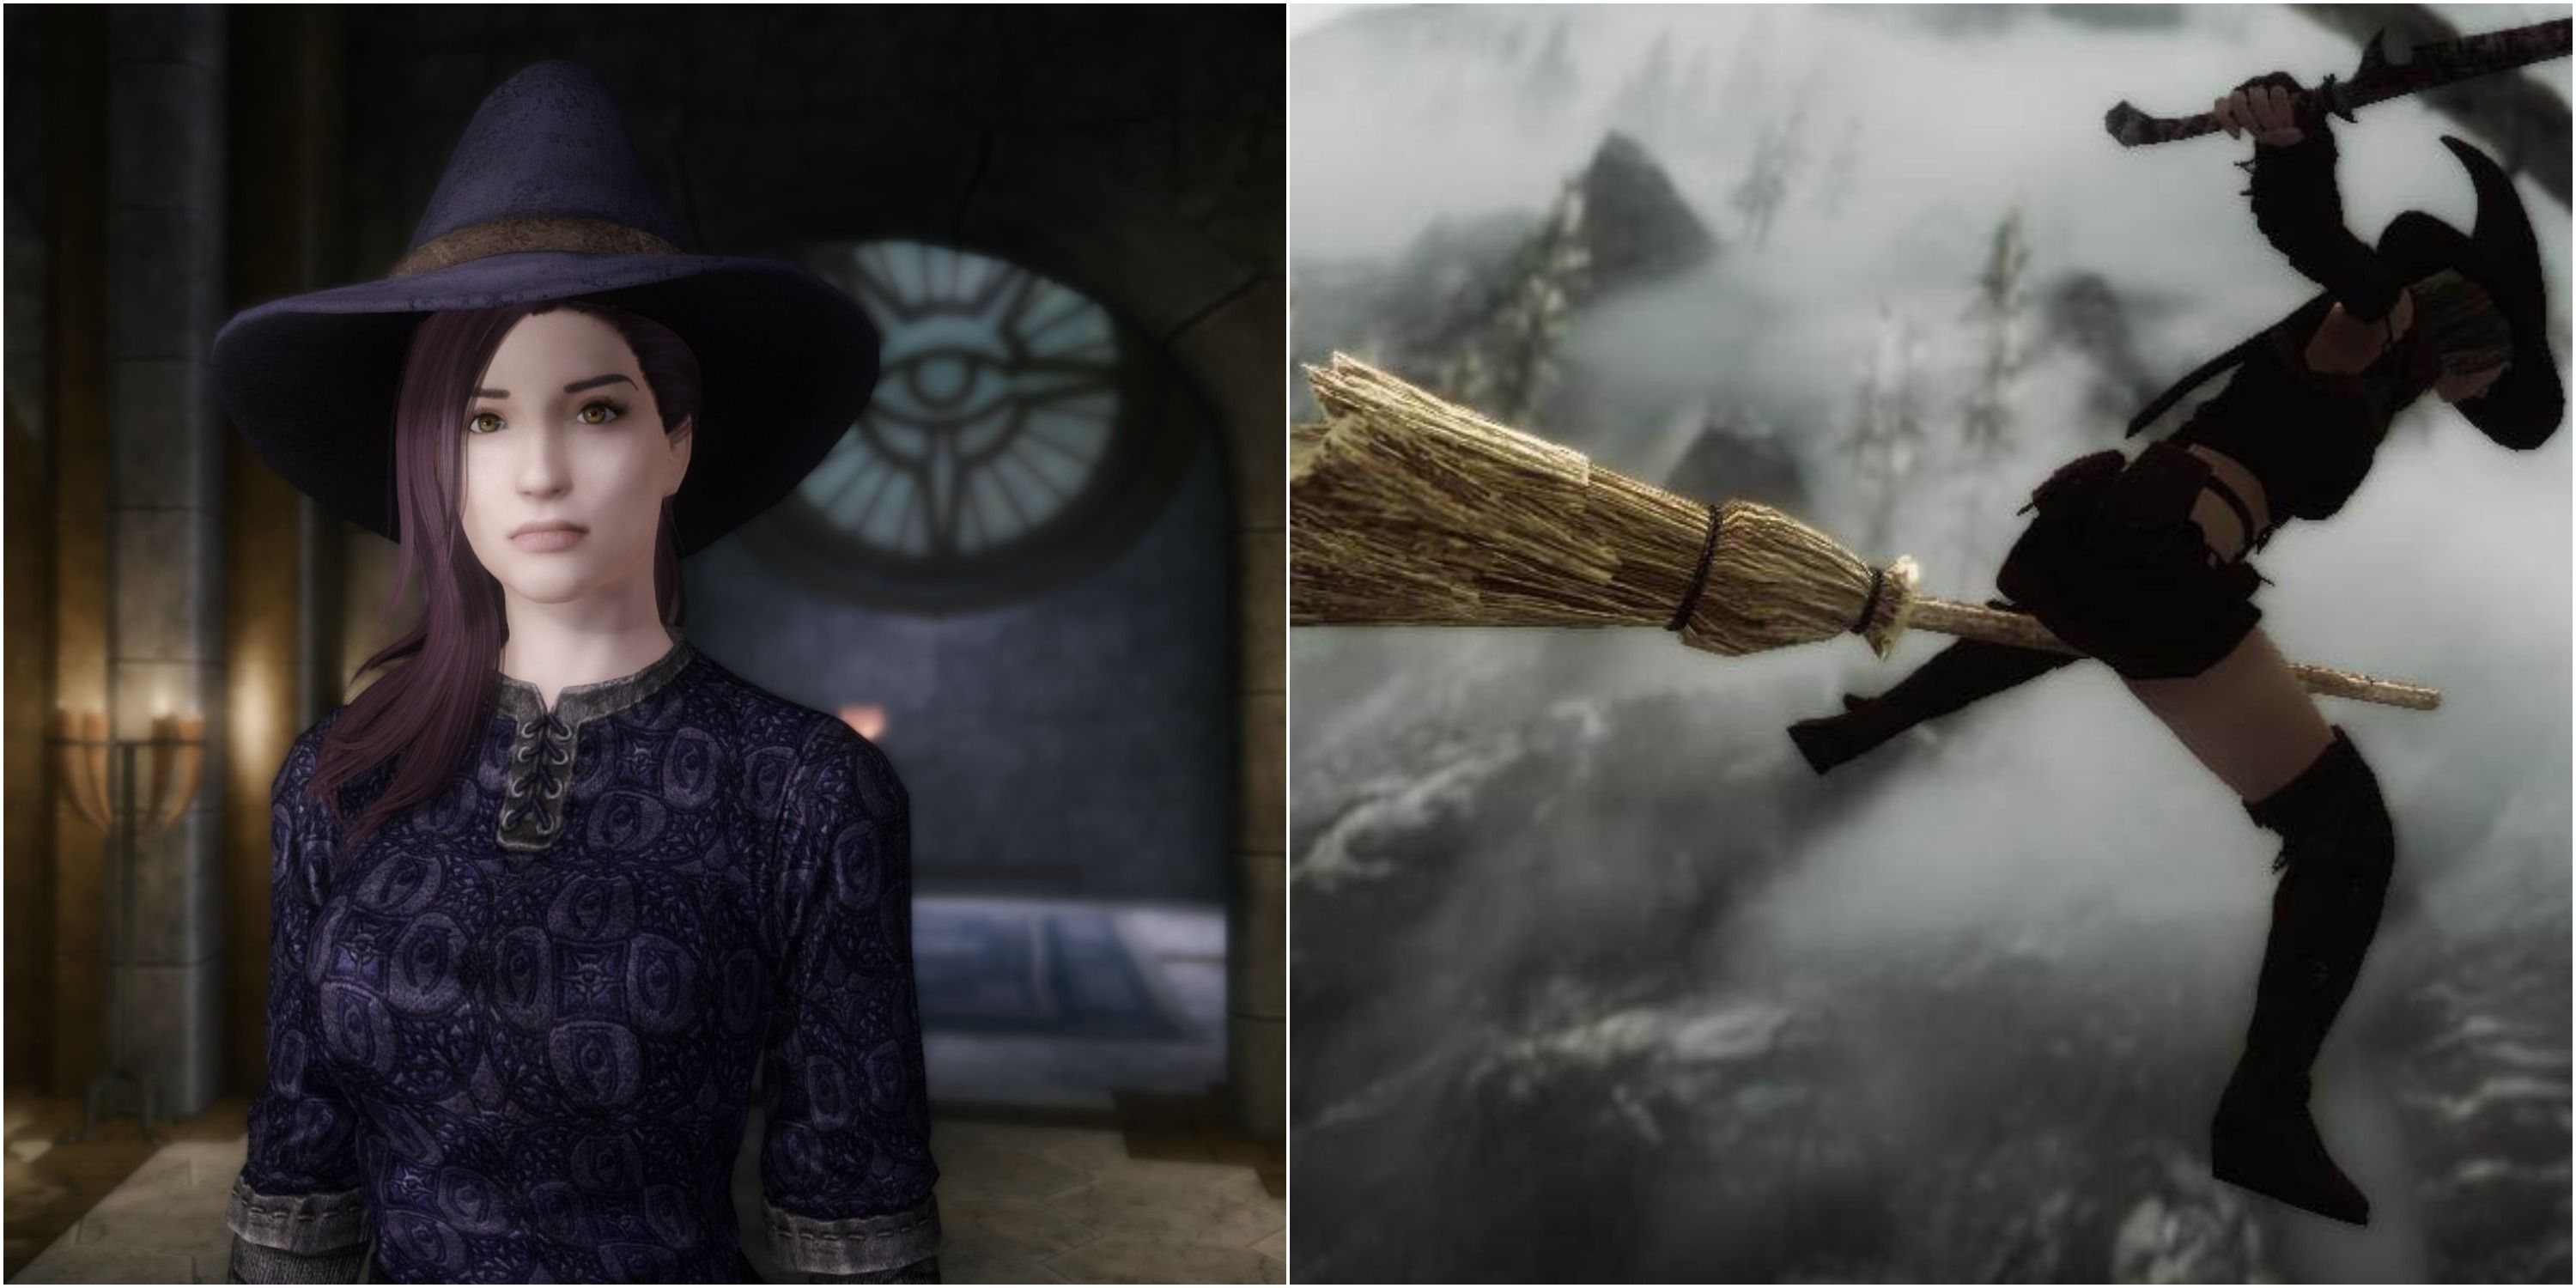 Hats mods and Flyable Broomstick mod added to make the game into Harry Potter